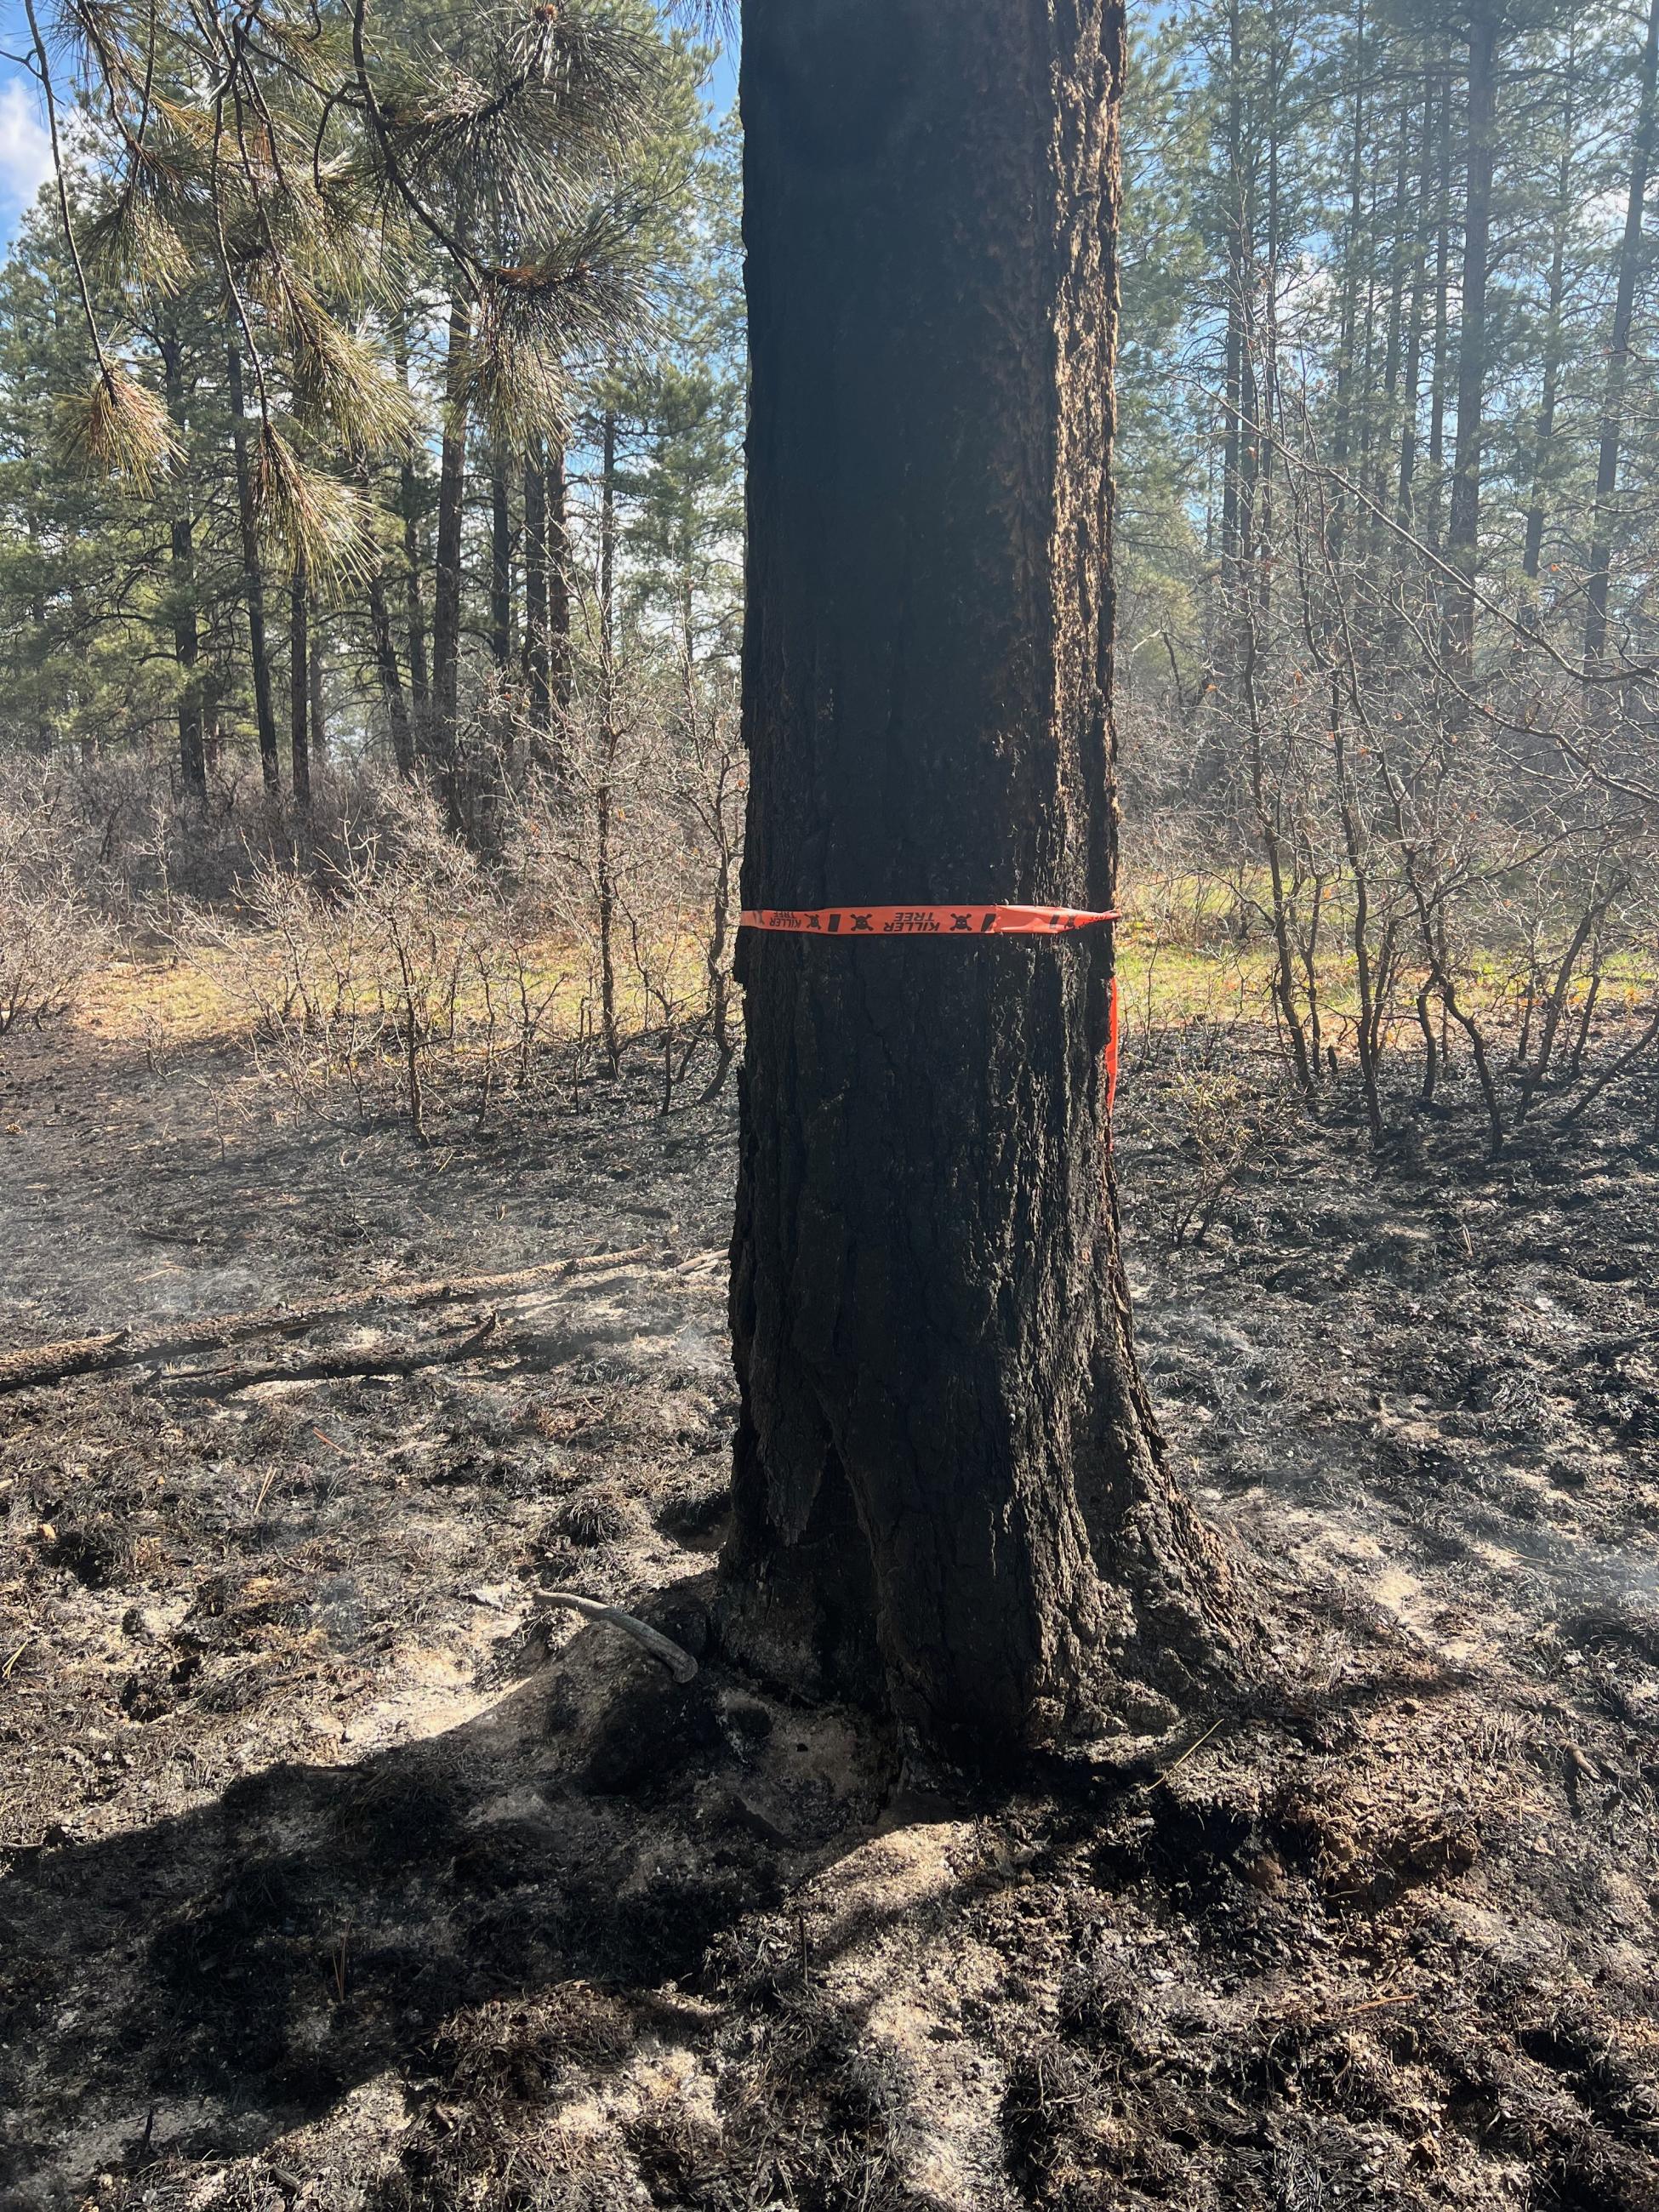 A charred tree trunk with orange flagging around it is seen in a recently burned area.